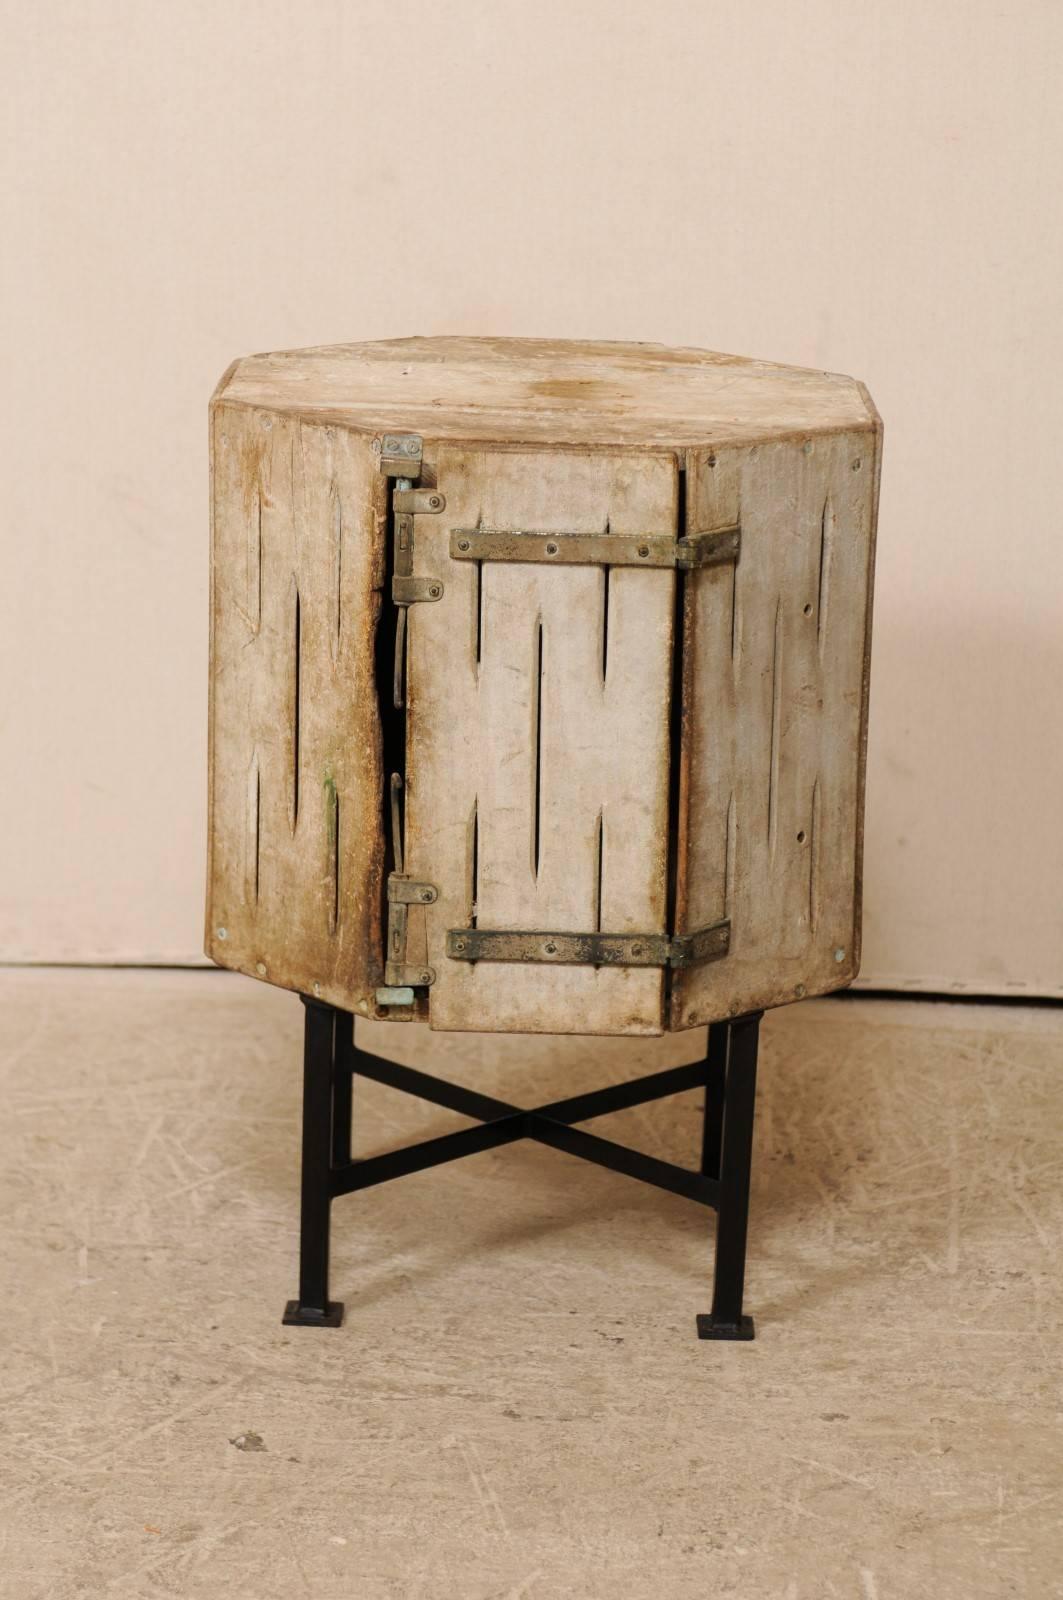 A Spanish box from early 20th century on black iron stand. This antique Spanish wood box has been re-purposed as whimsical little drinks or side table with the newer addition of a black iron base and legs. The wood box has an octagonal shape,